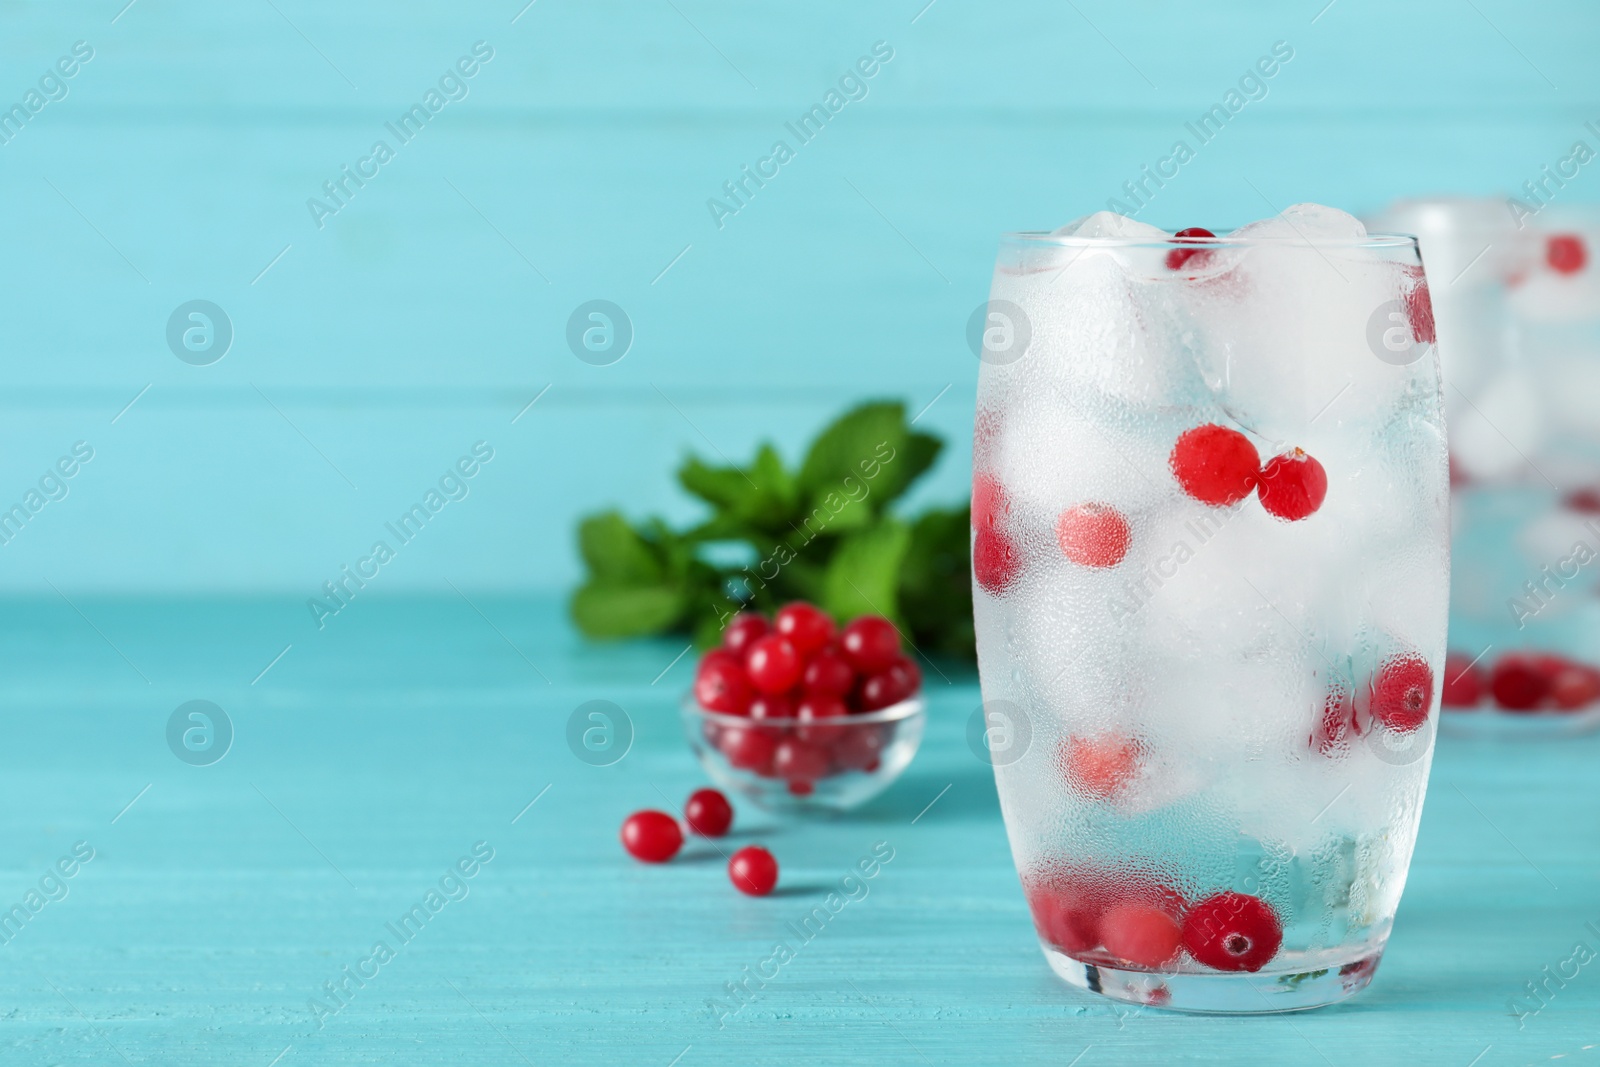 Photo of Glass of cocktail with vodka, ice and cranberry on blue wooden table. Space for text